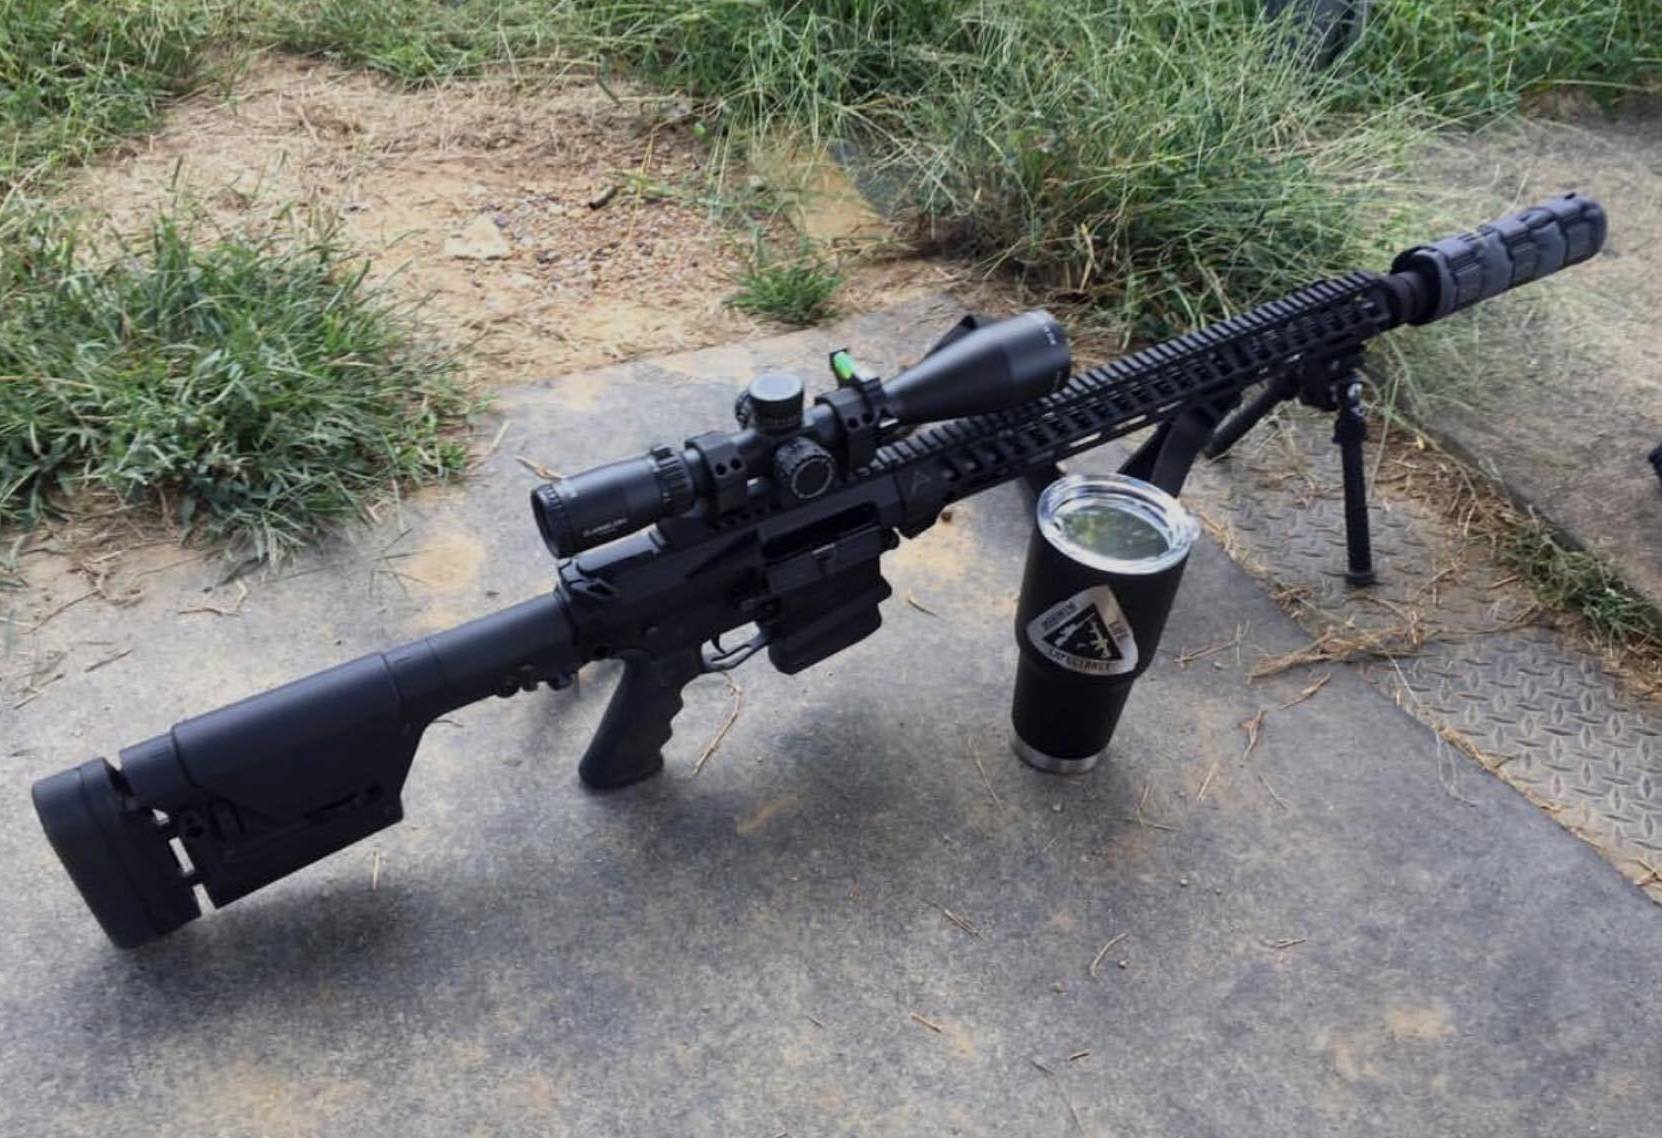 Dirk: When my Ares BTR RifleScope arrived I was immediately surprised...Its built like a tank!